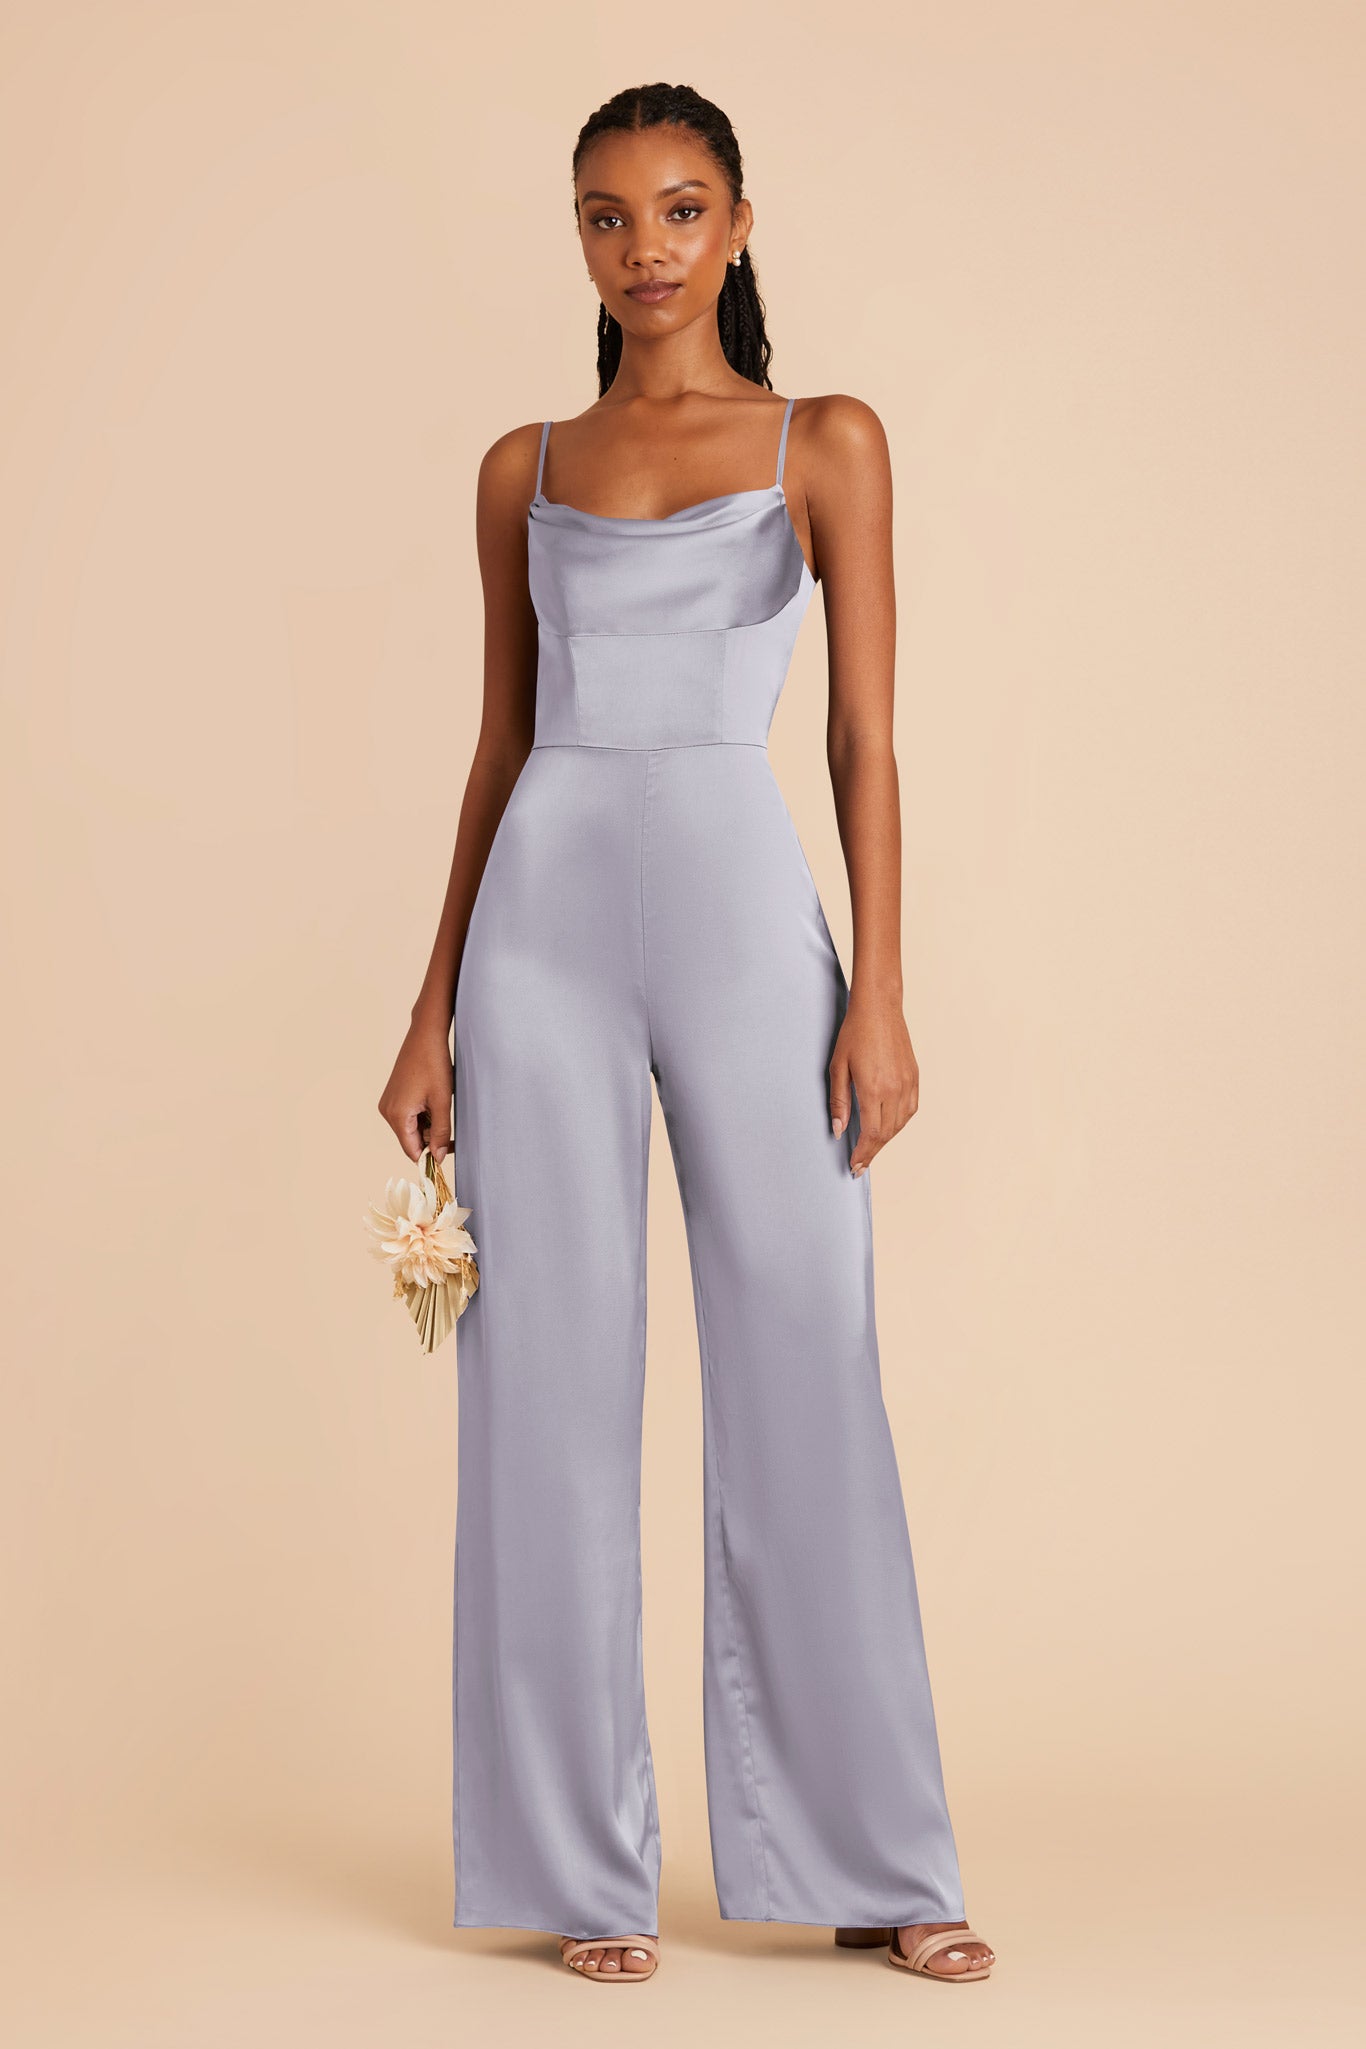 Periwinkle Blue Donna Matte Satin Bridesmaid Jumpsuit by Birdy Grey